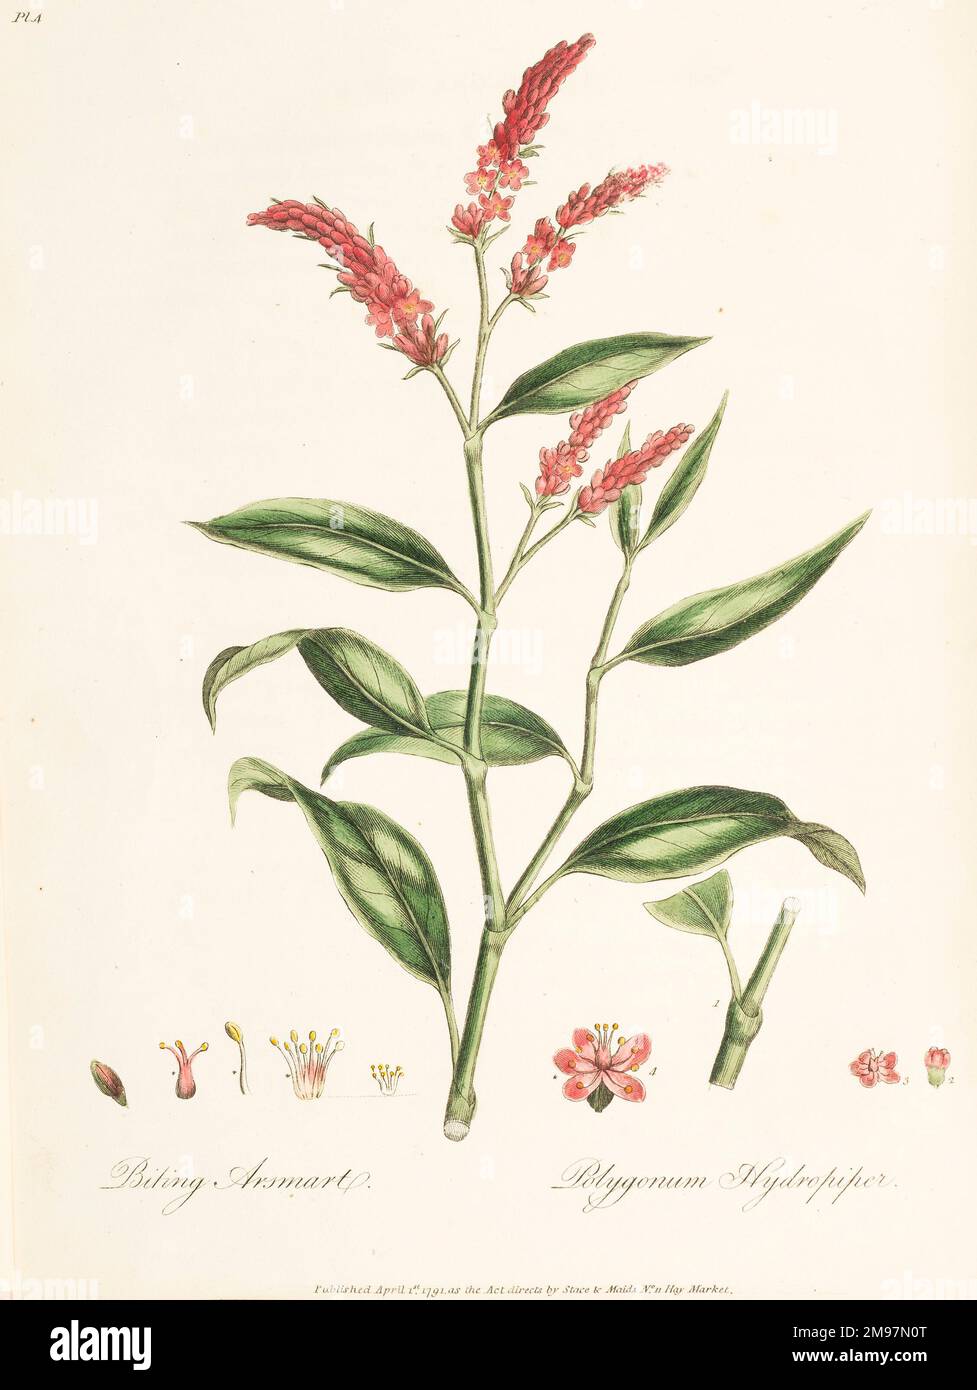 Biting Arsmart, Polygonum hydropiper. Copperplate illustration from Edward Baylis, A new and compleat body of practical botanic physic from the medicinal plants of the vegetable kingdom, Vol. 1 Stock Photo